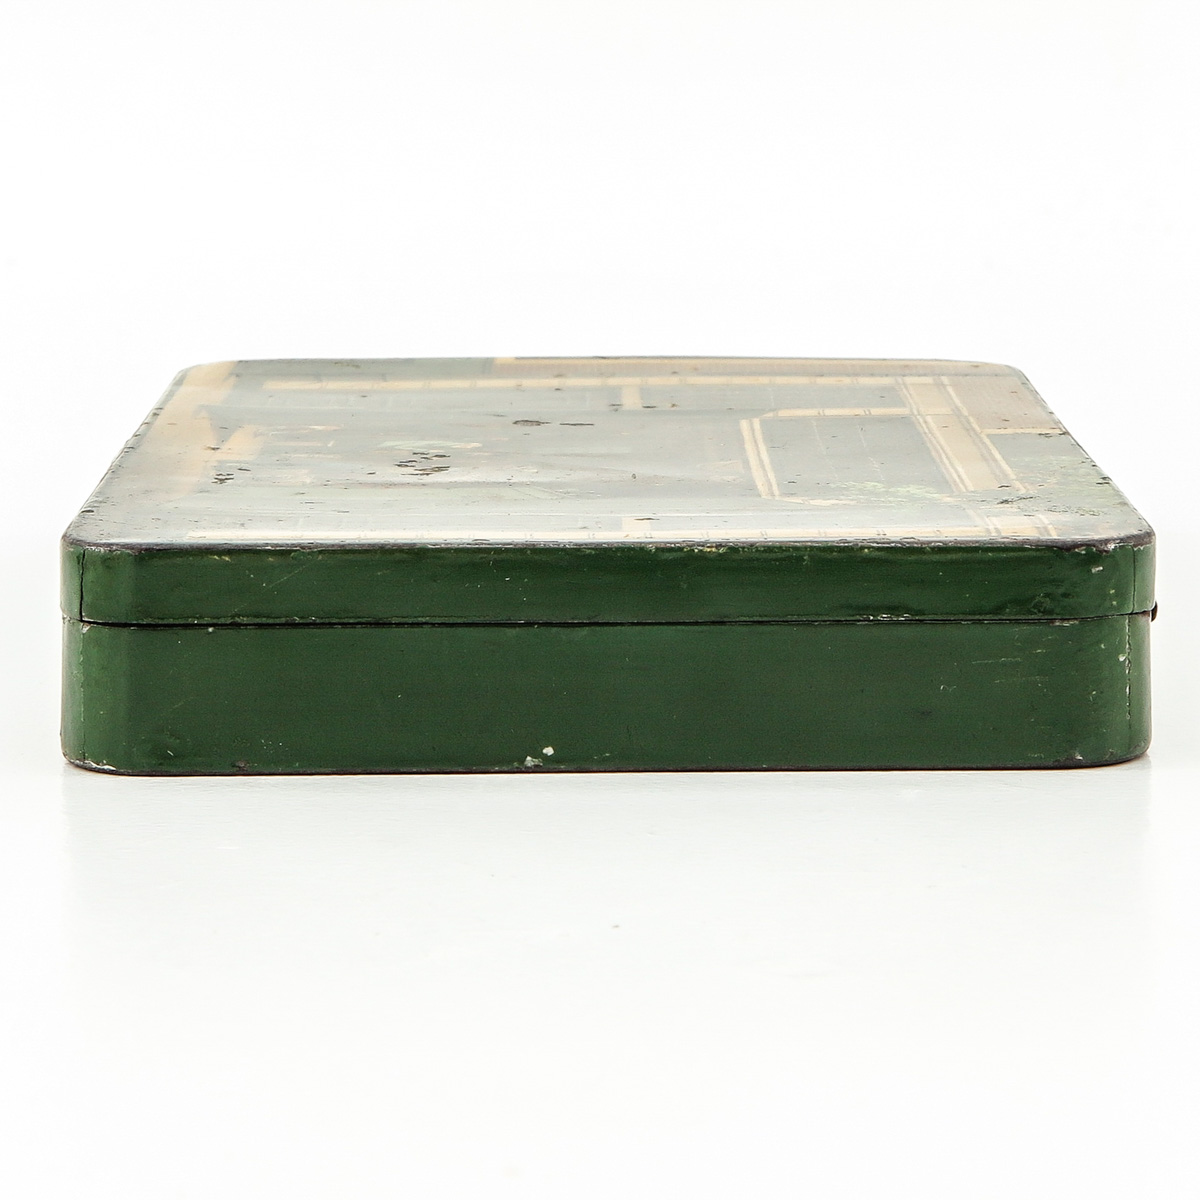 A 19th Century Painted Tin Tobacco Box - Image 3 of 9